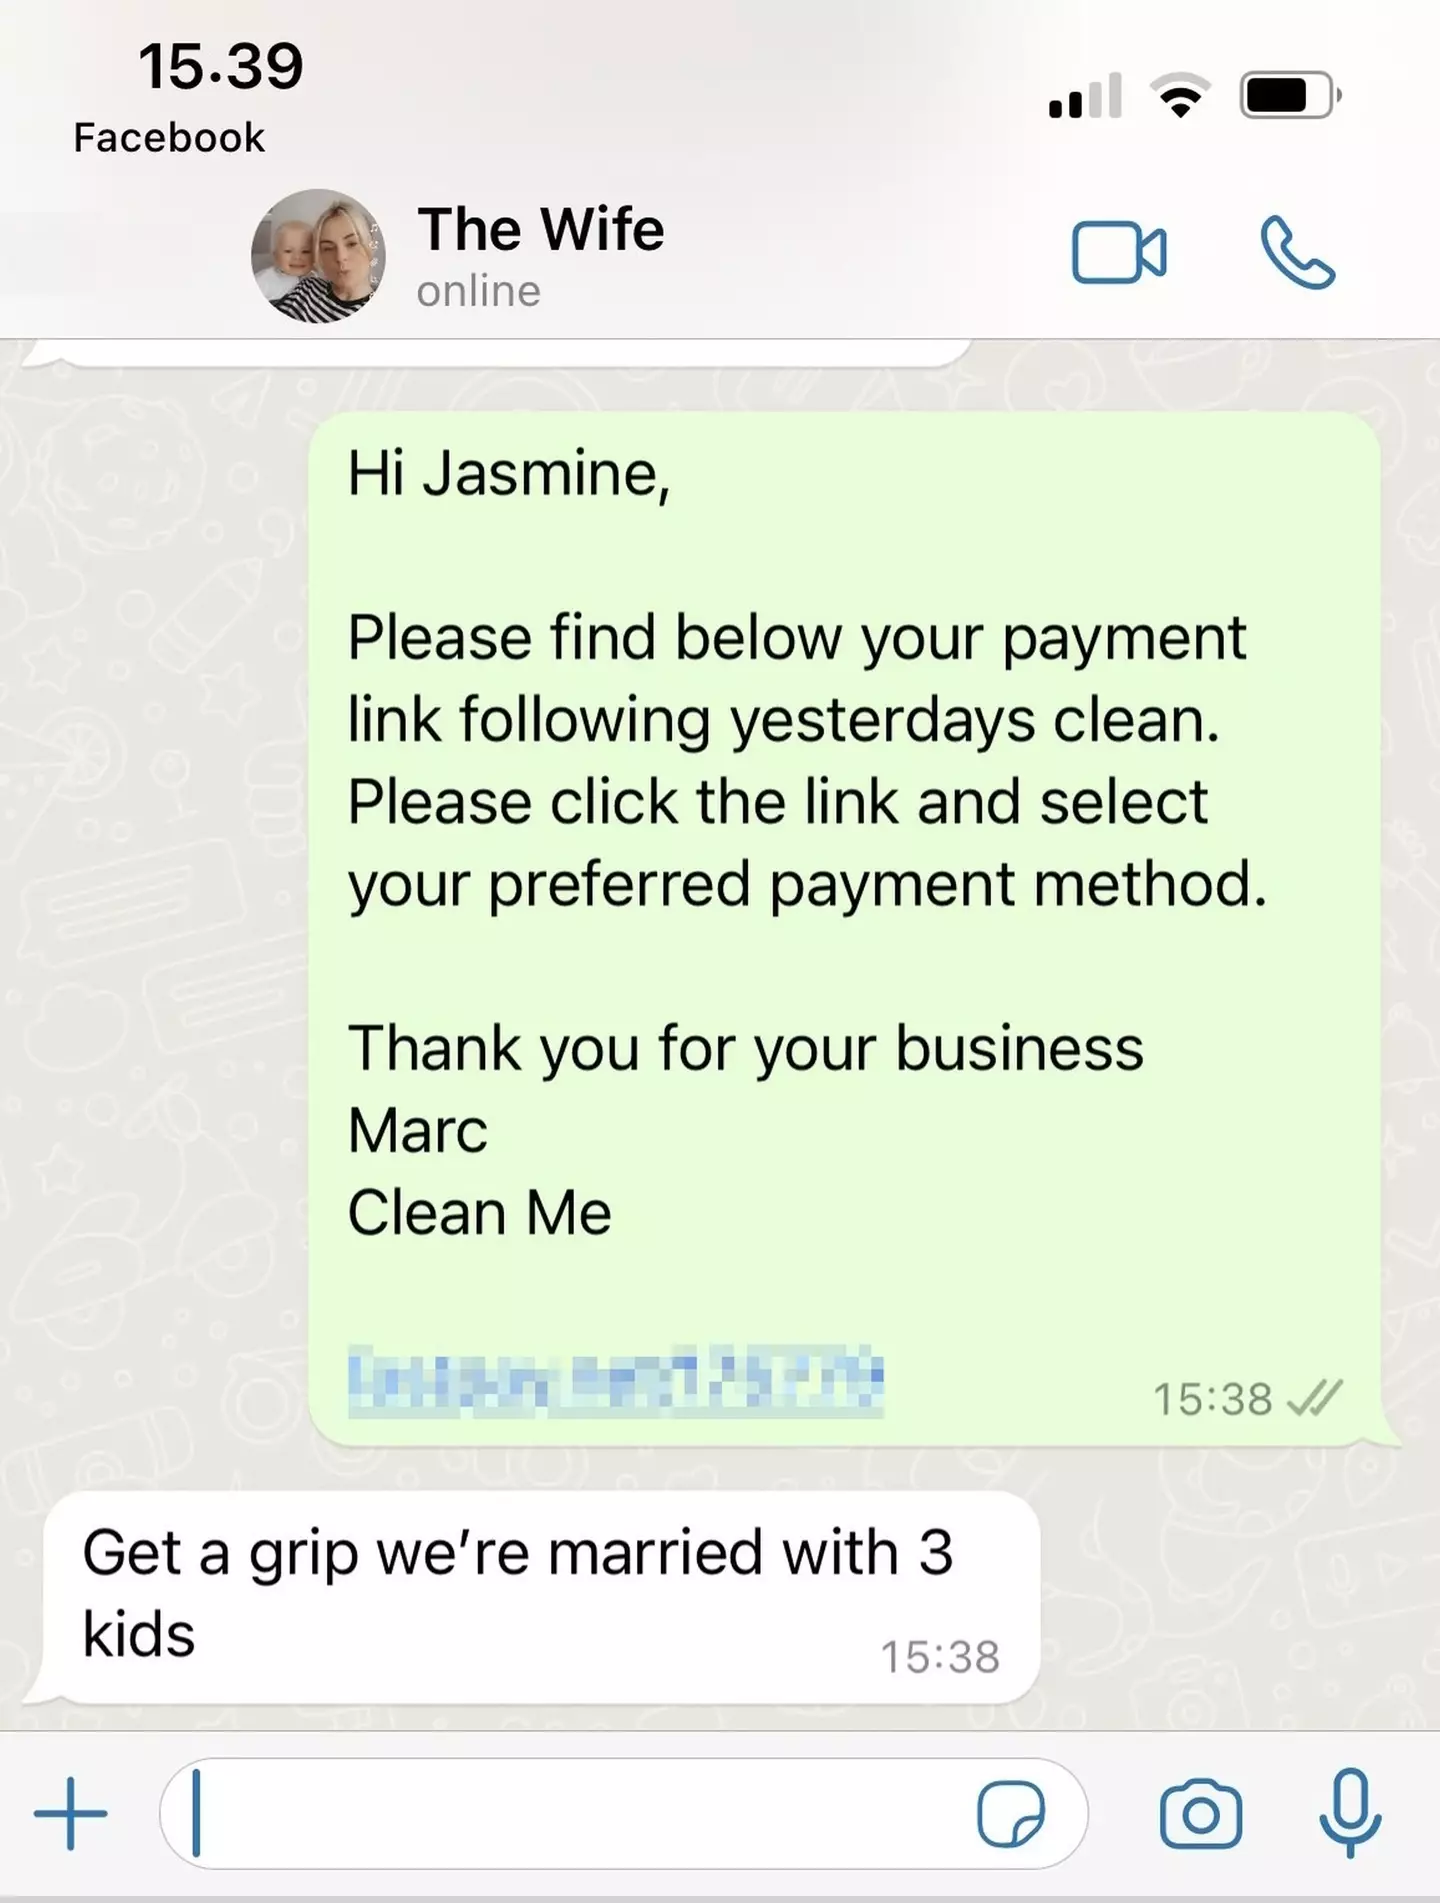 He sent her the invoice via message.